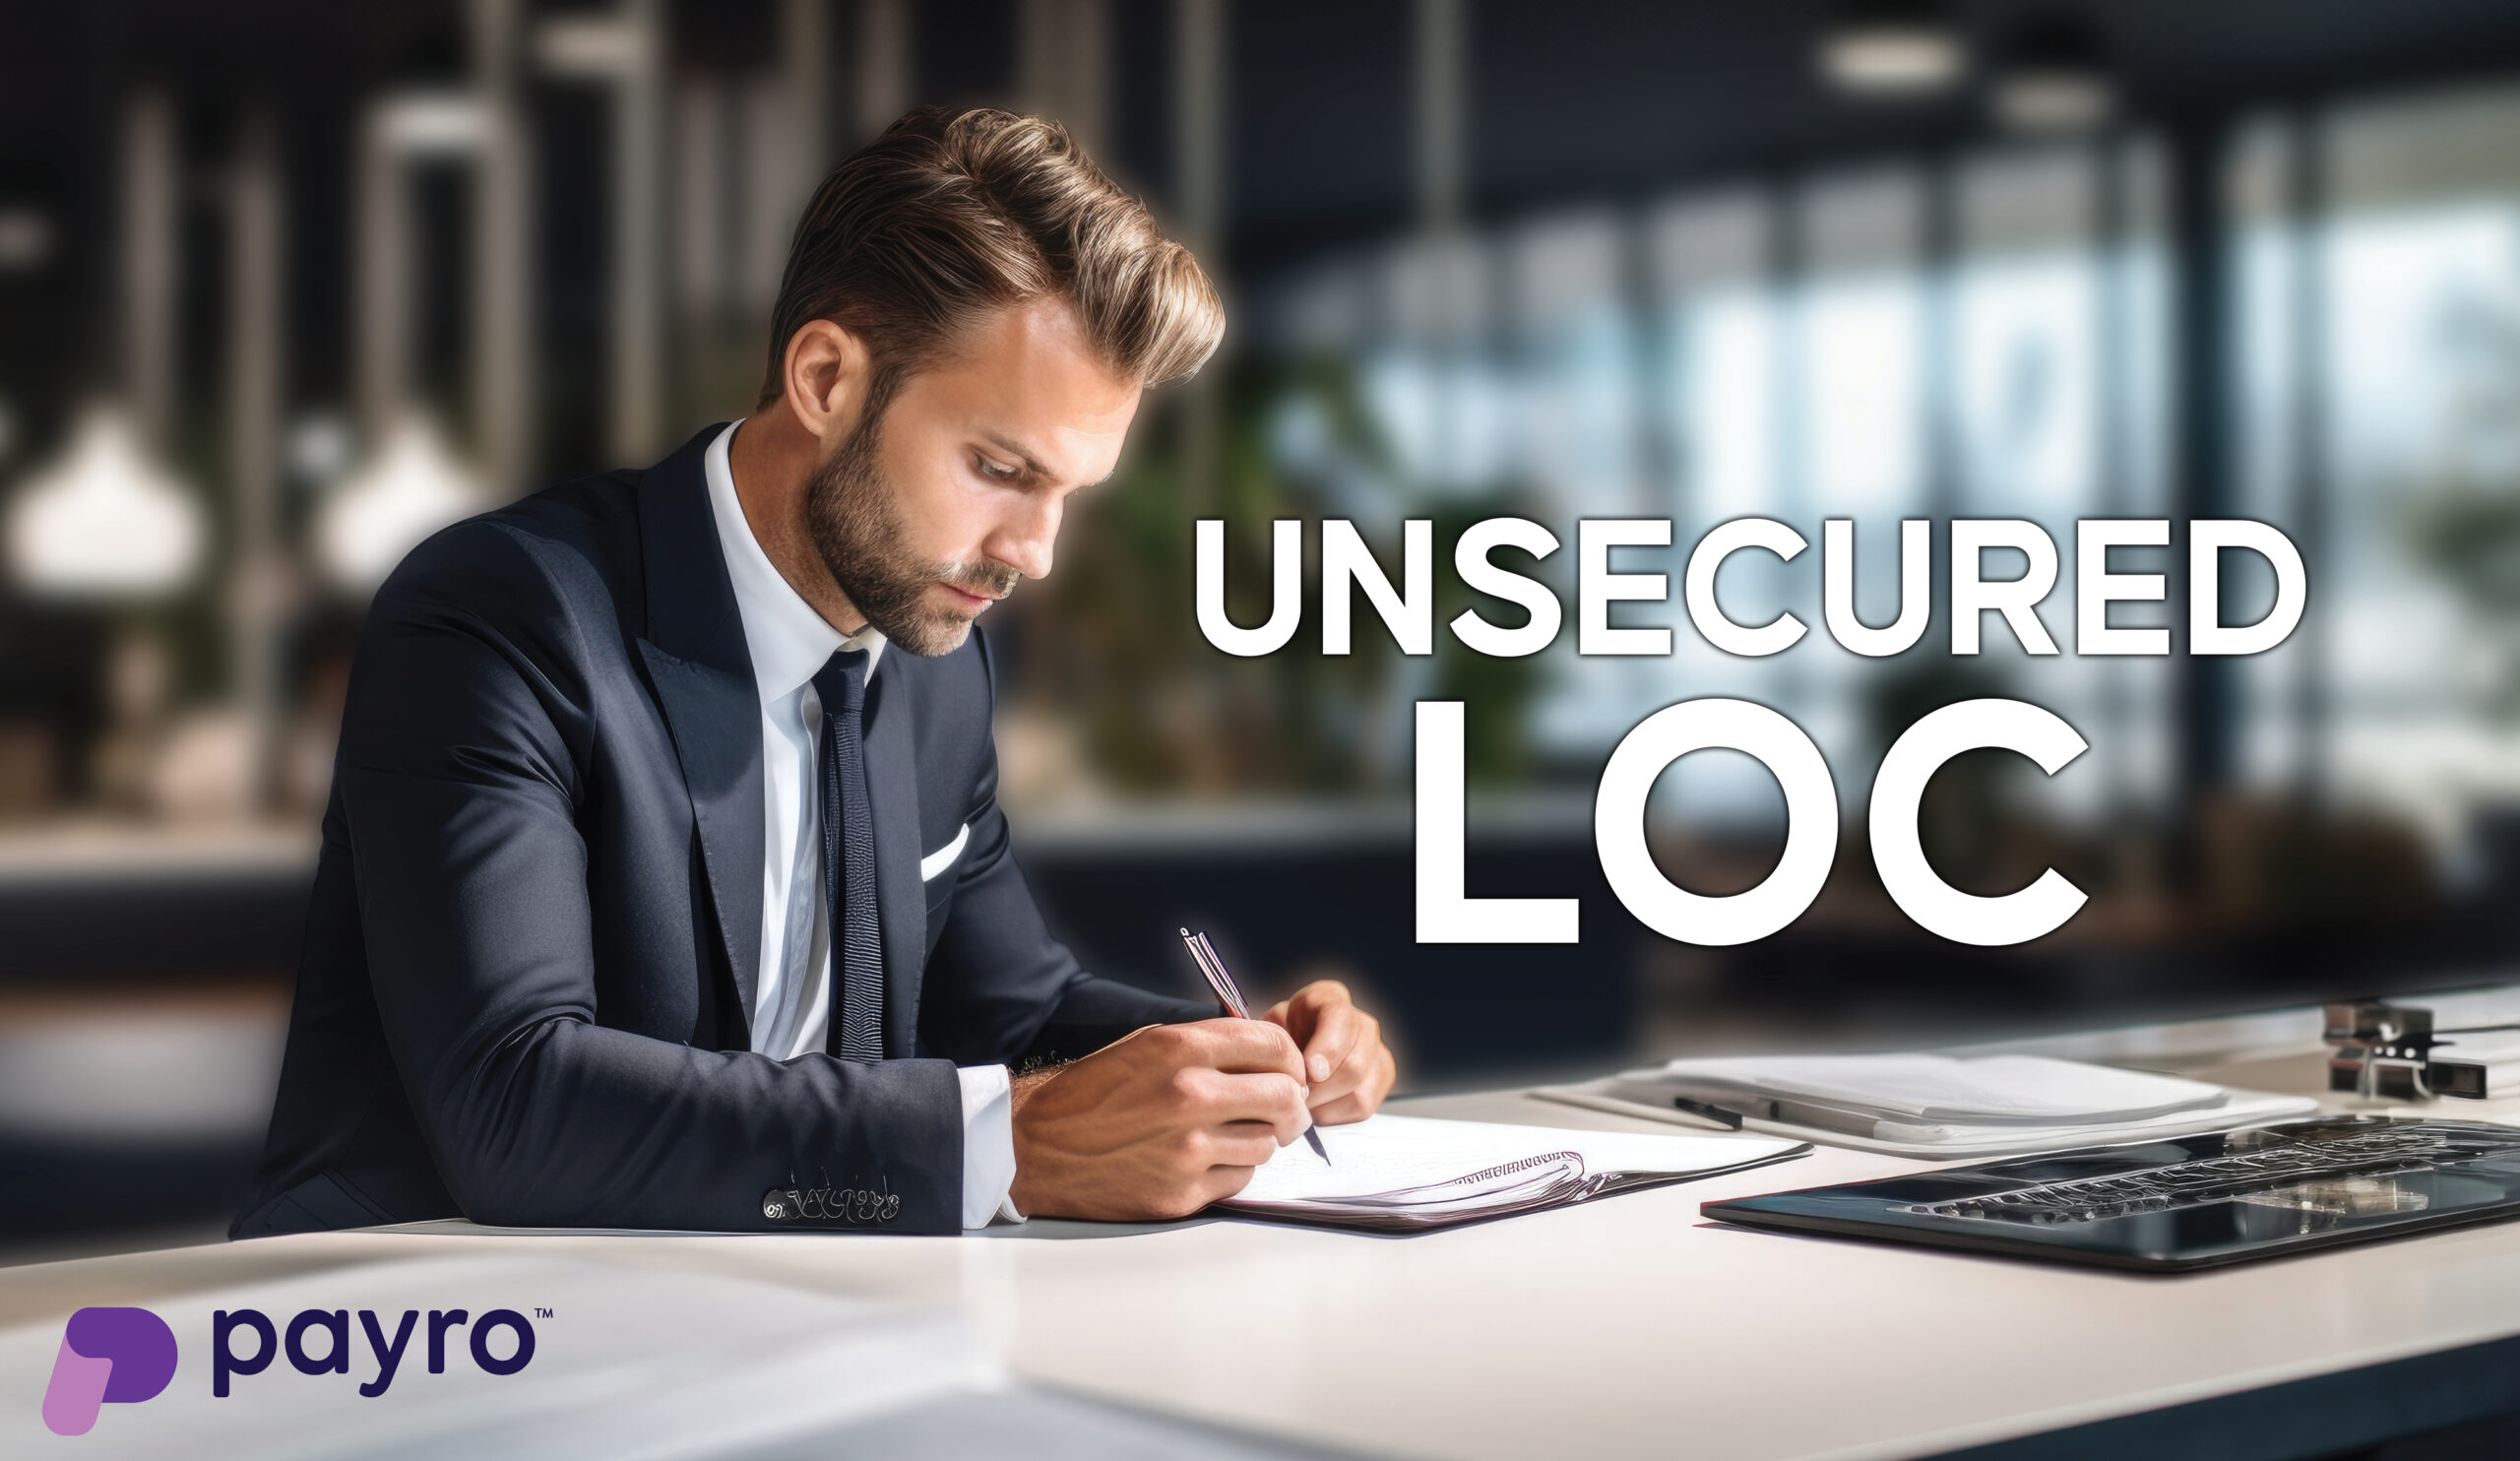 Expert advice: How to qualify for an unsecured business LOC (without collateral)